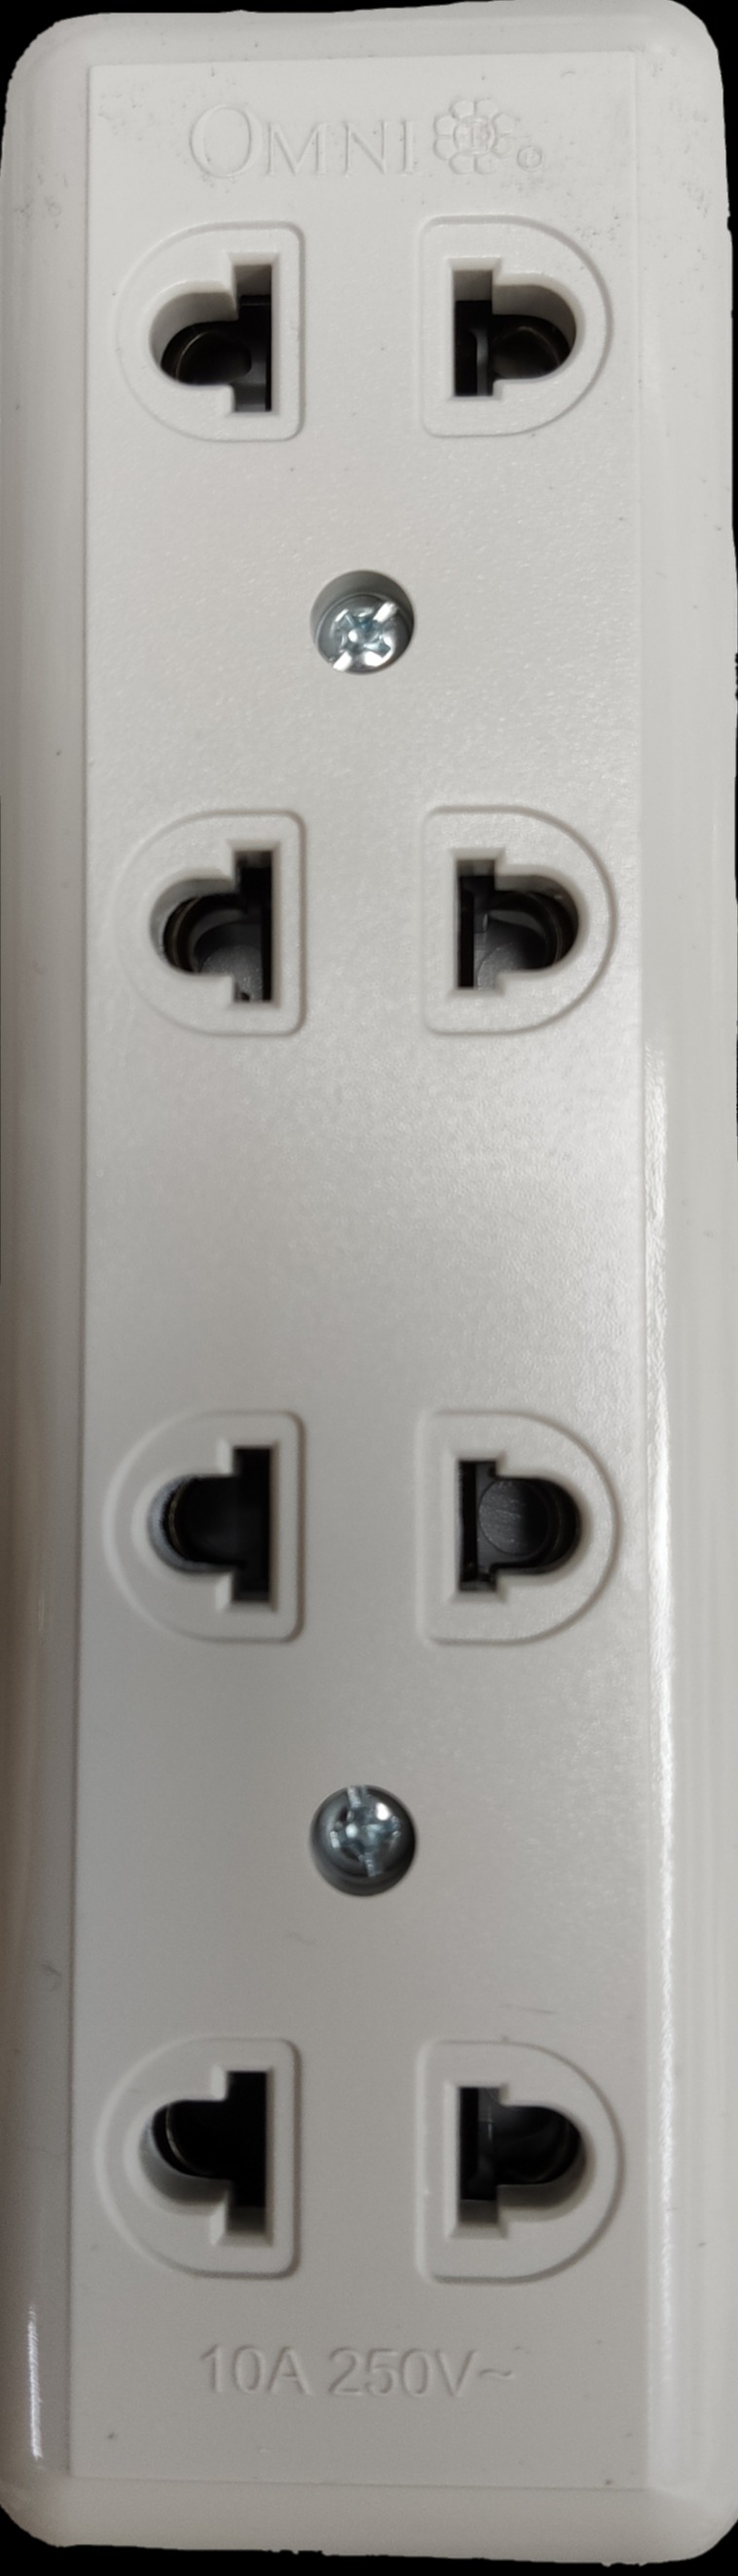 Extension Outlet 4 Gang, Surface Type Outlet 4 Gang Flat Pin and Round ...